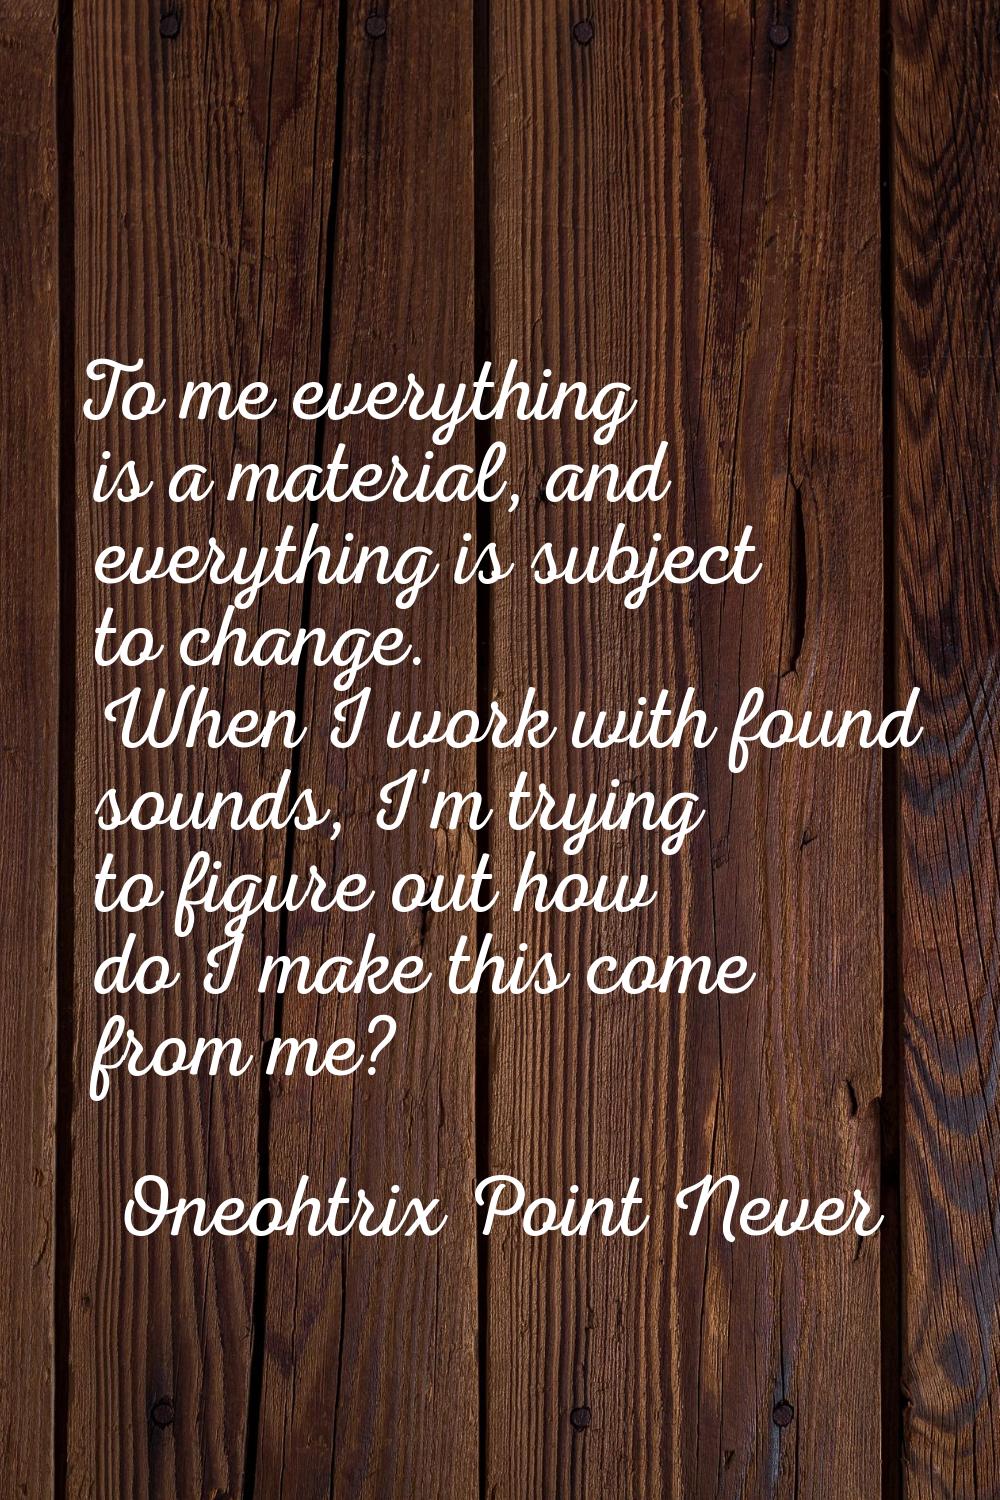 To me everything is a material, and everything is subject to change. When I work with found sounds,